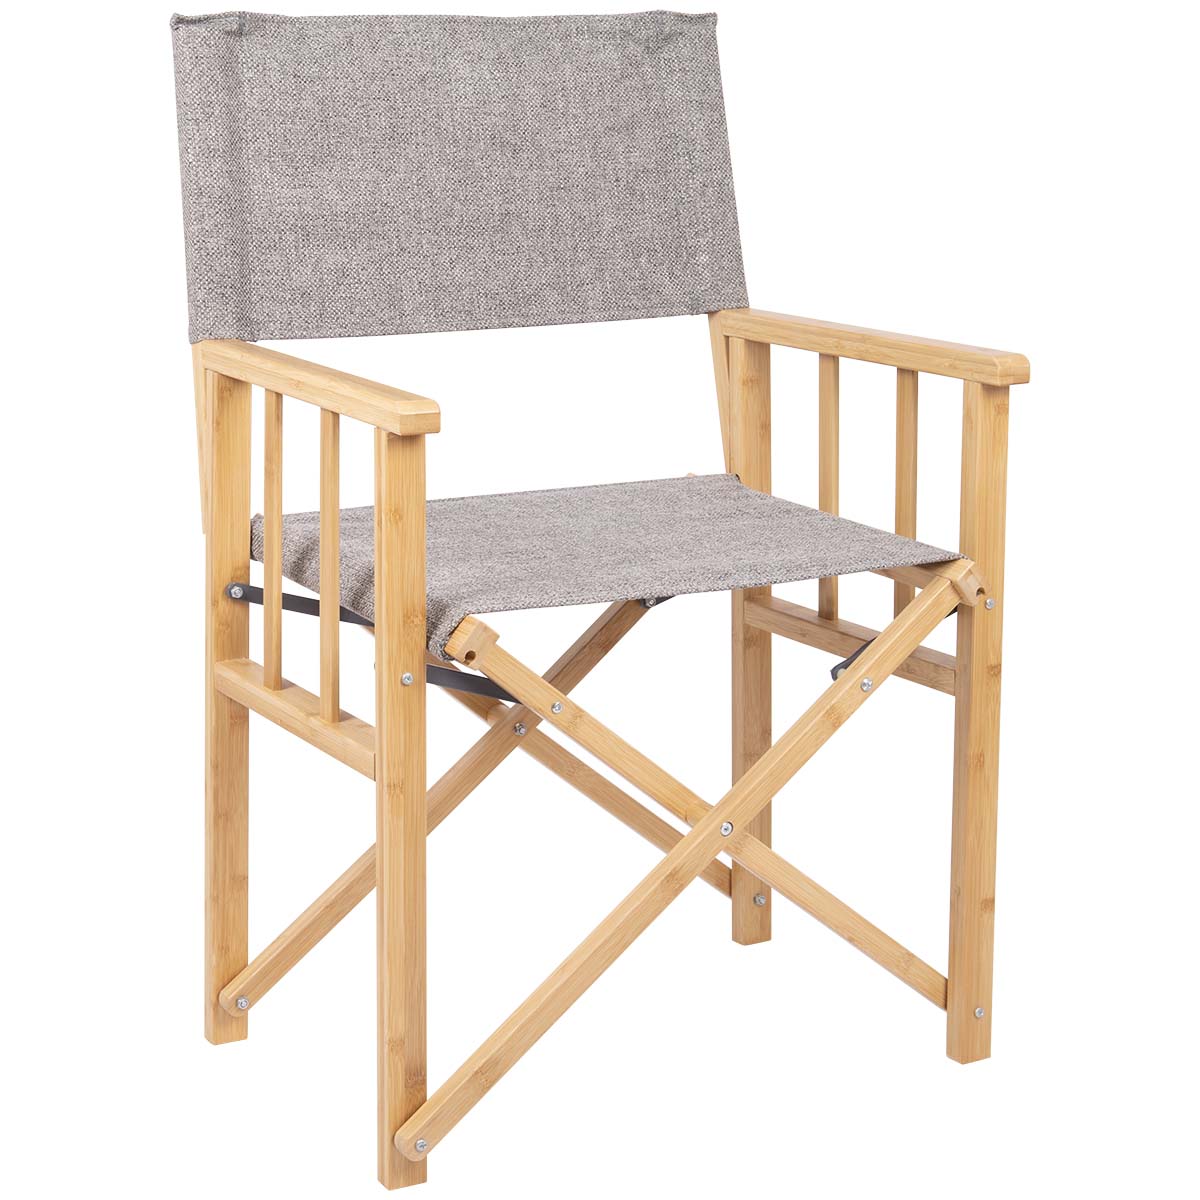 1267225 "A stylish director's chair from the Urban Outdoor collection. The chair features a sturdy bamboo frame. The upholstery is made of Nika which has a linen look. Ideal for use at the table or outside in front of the tent. Compact and easy to carry."